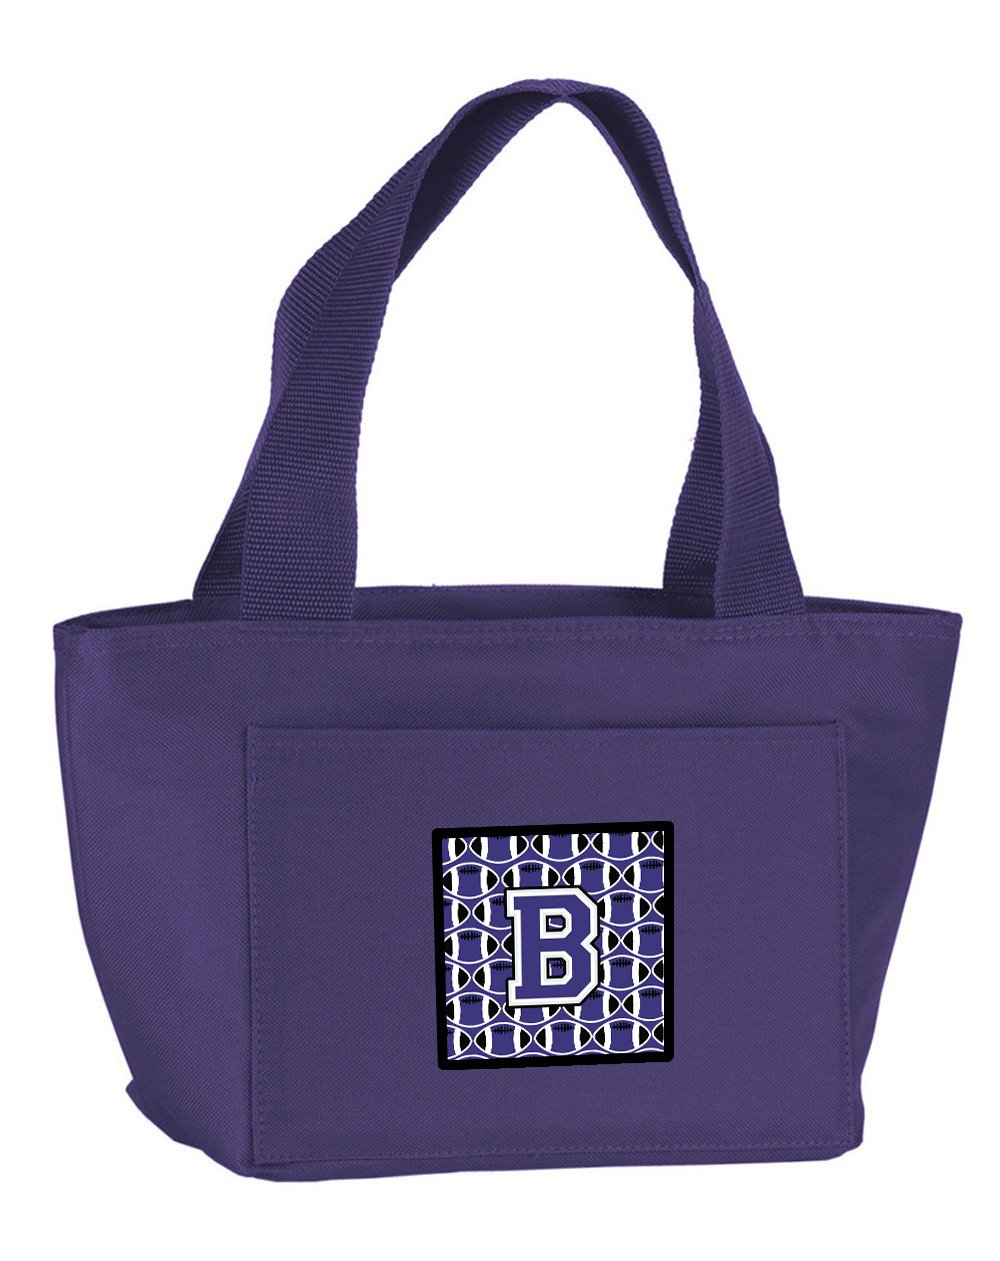 Letter B Football Purple and White Lunch Bag CJ1068-BPR-8808 by Caroline&#39;s Treasures